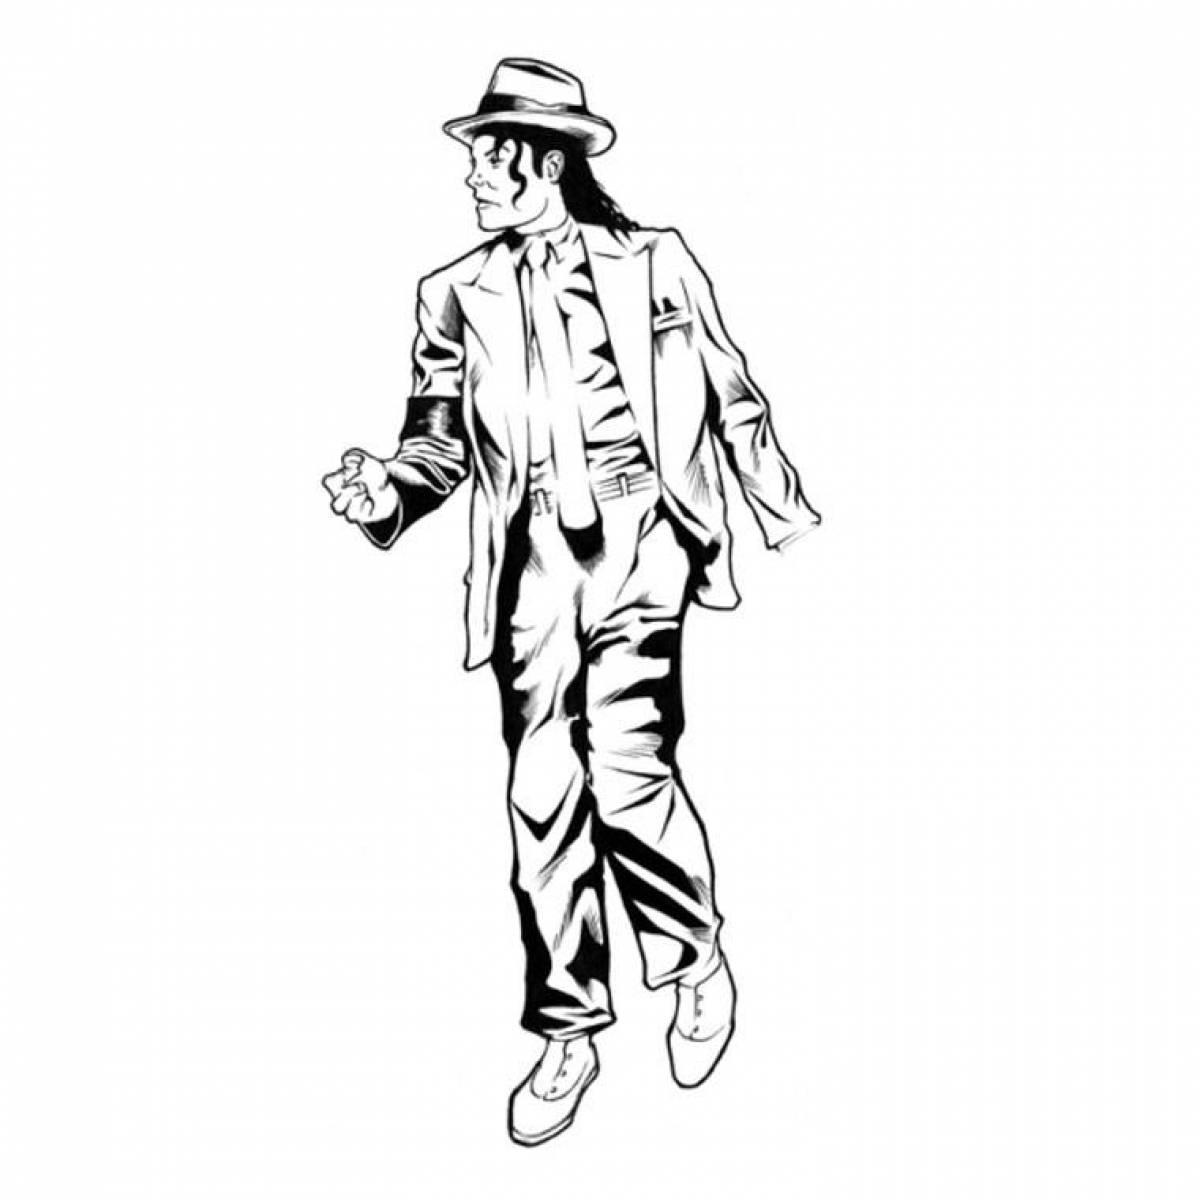 Michael jackson's amazing coloring page